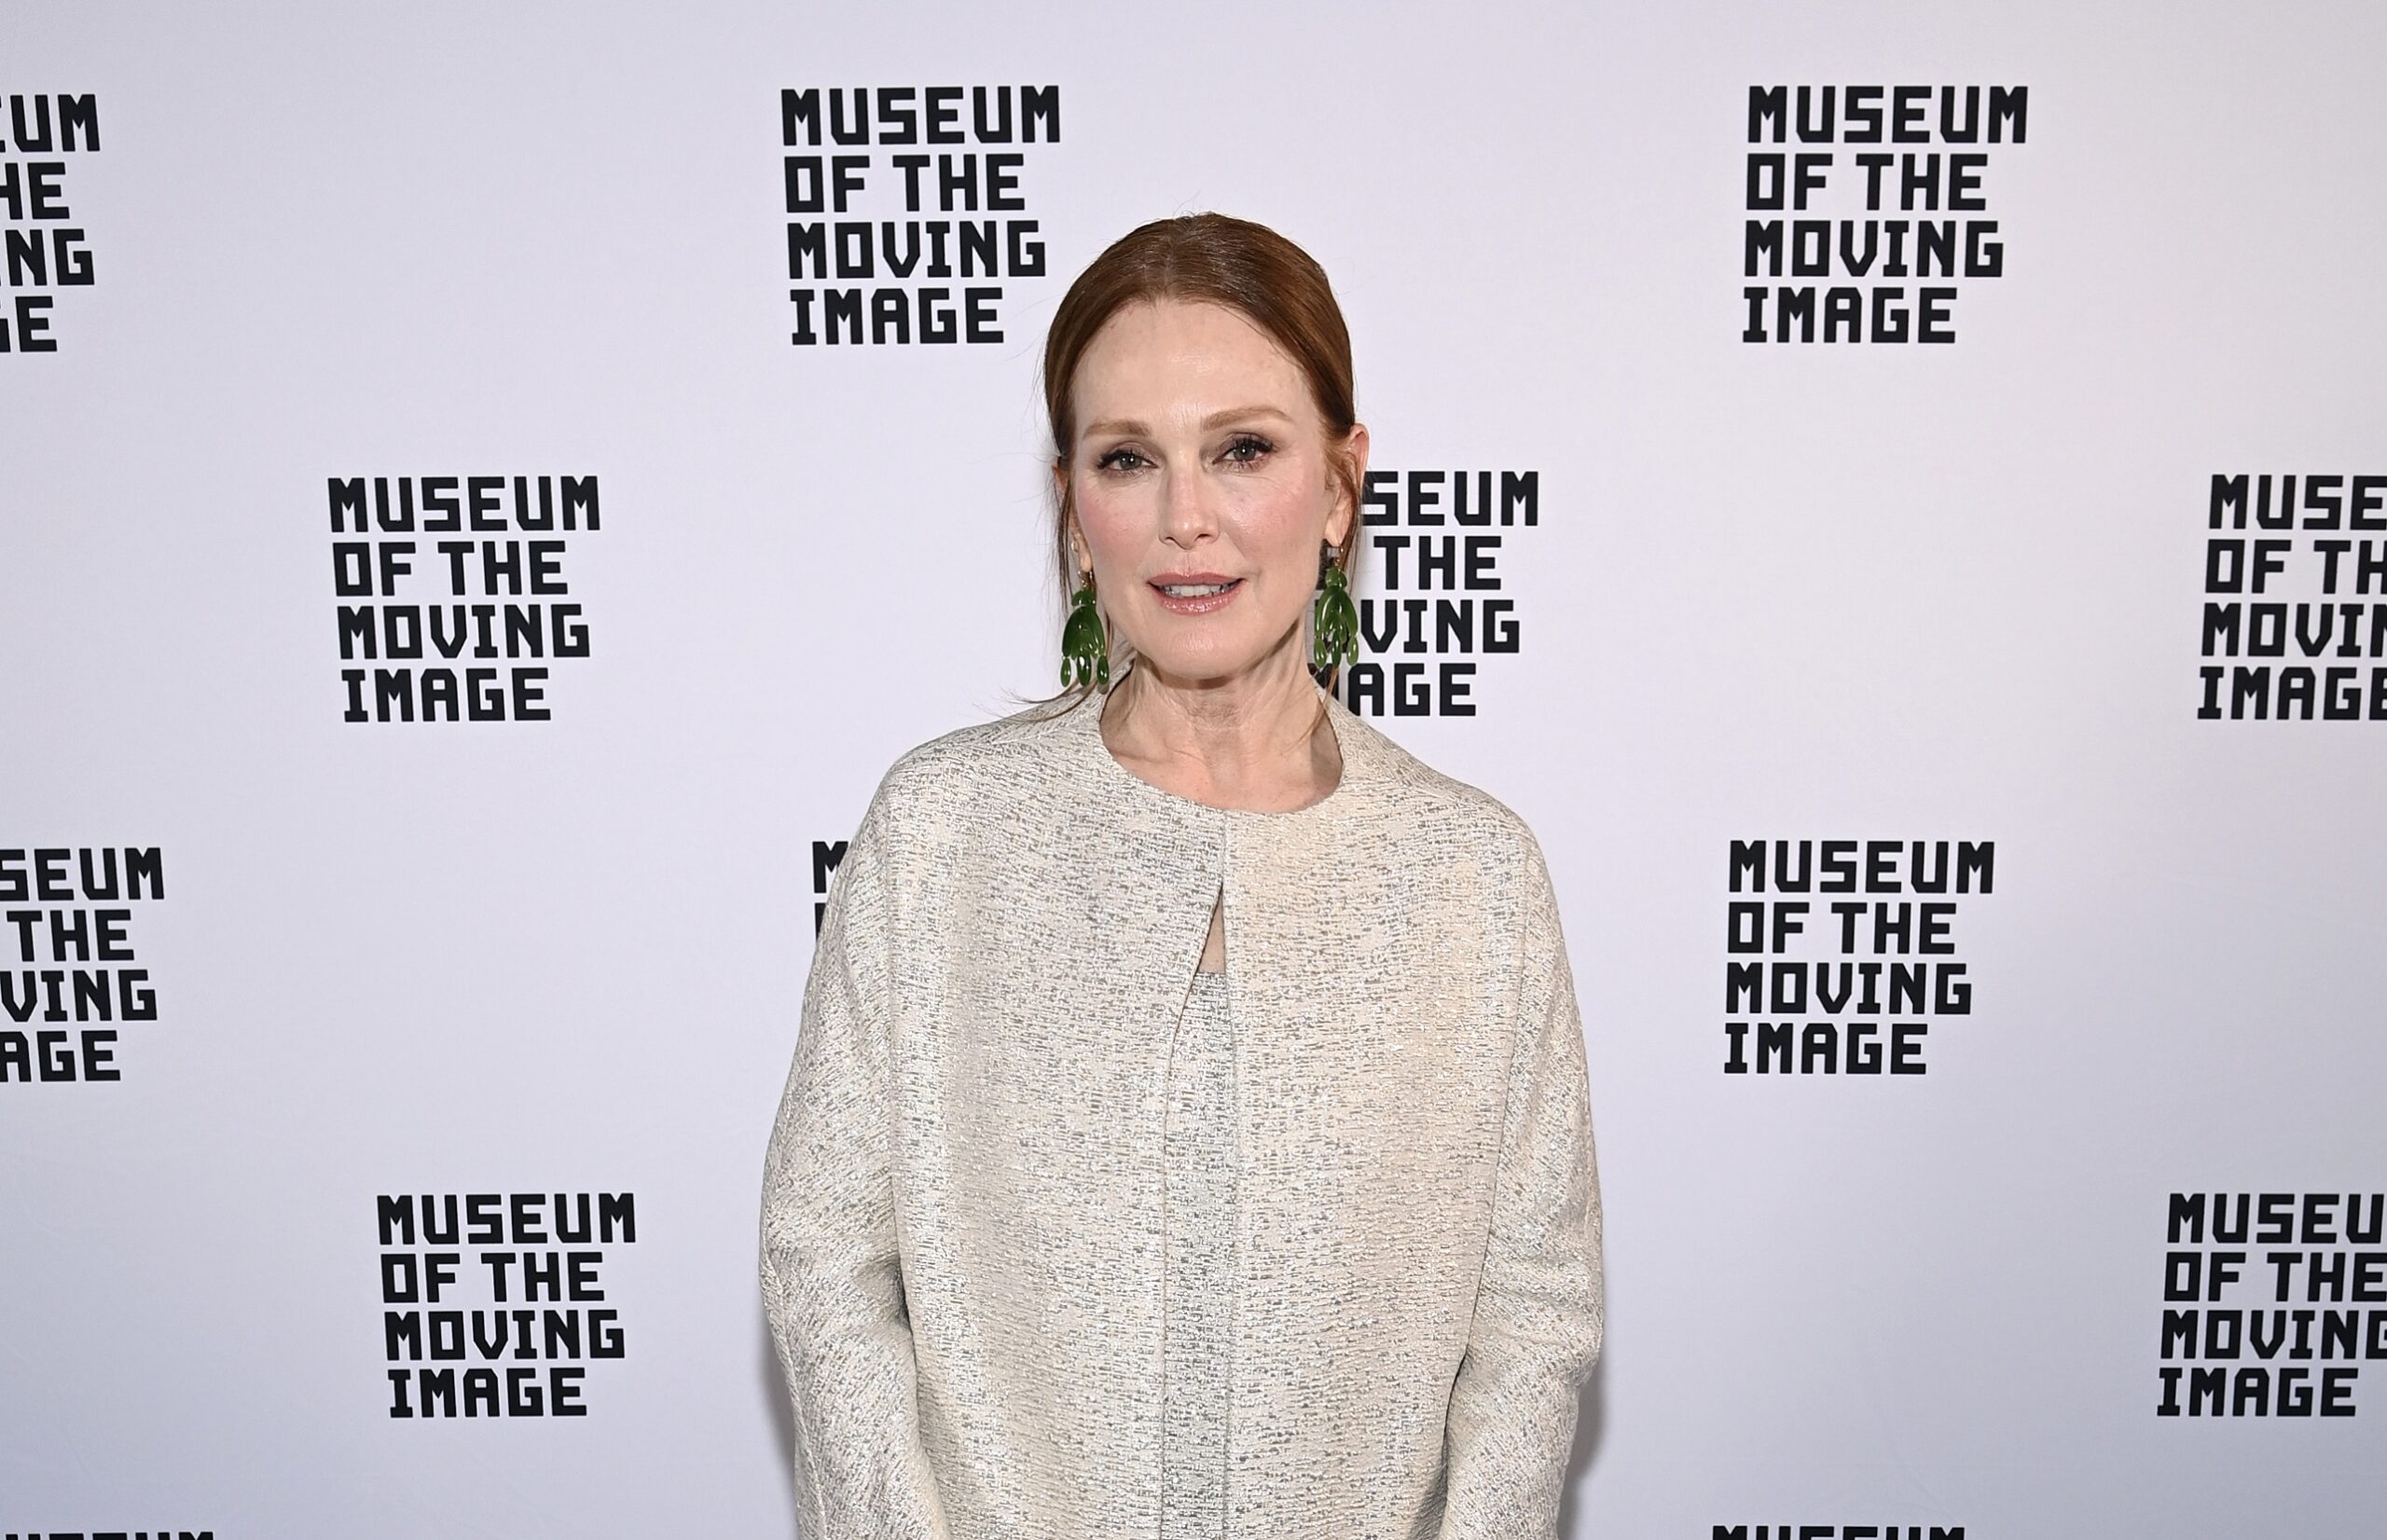 Julianne Moore at the Museum of the Moving Image event in a textured cream coat, honoring Todd Haynes in New York City.